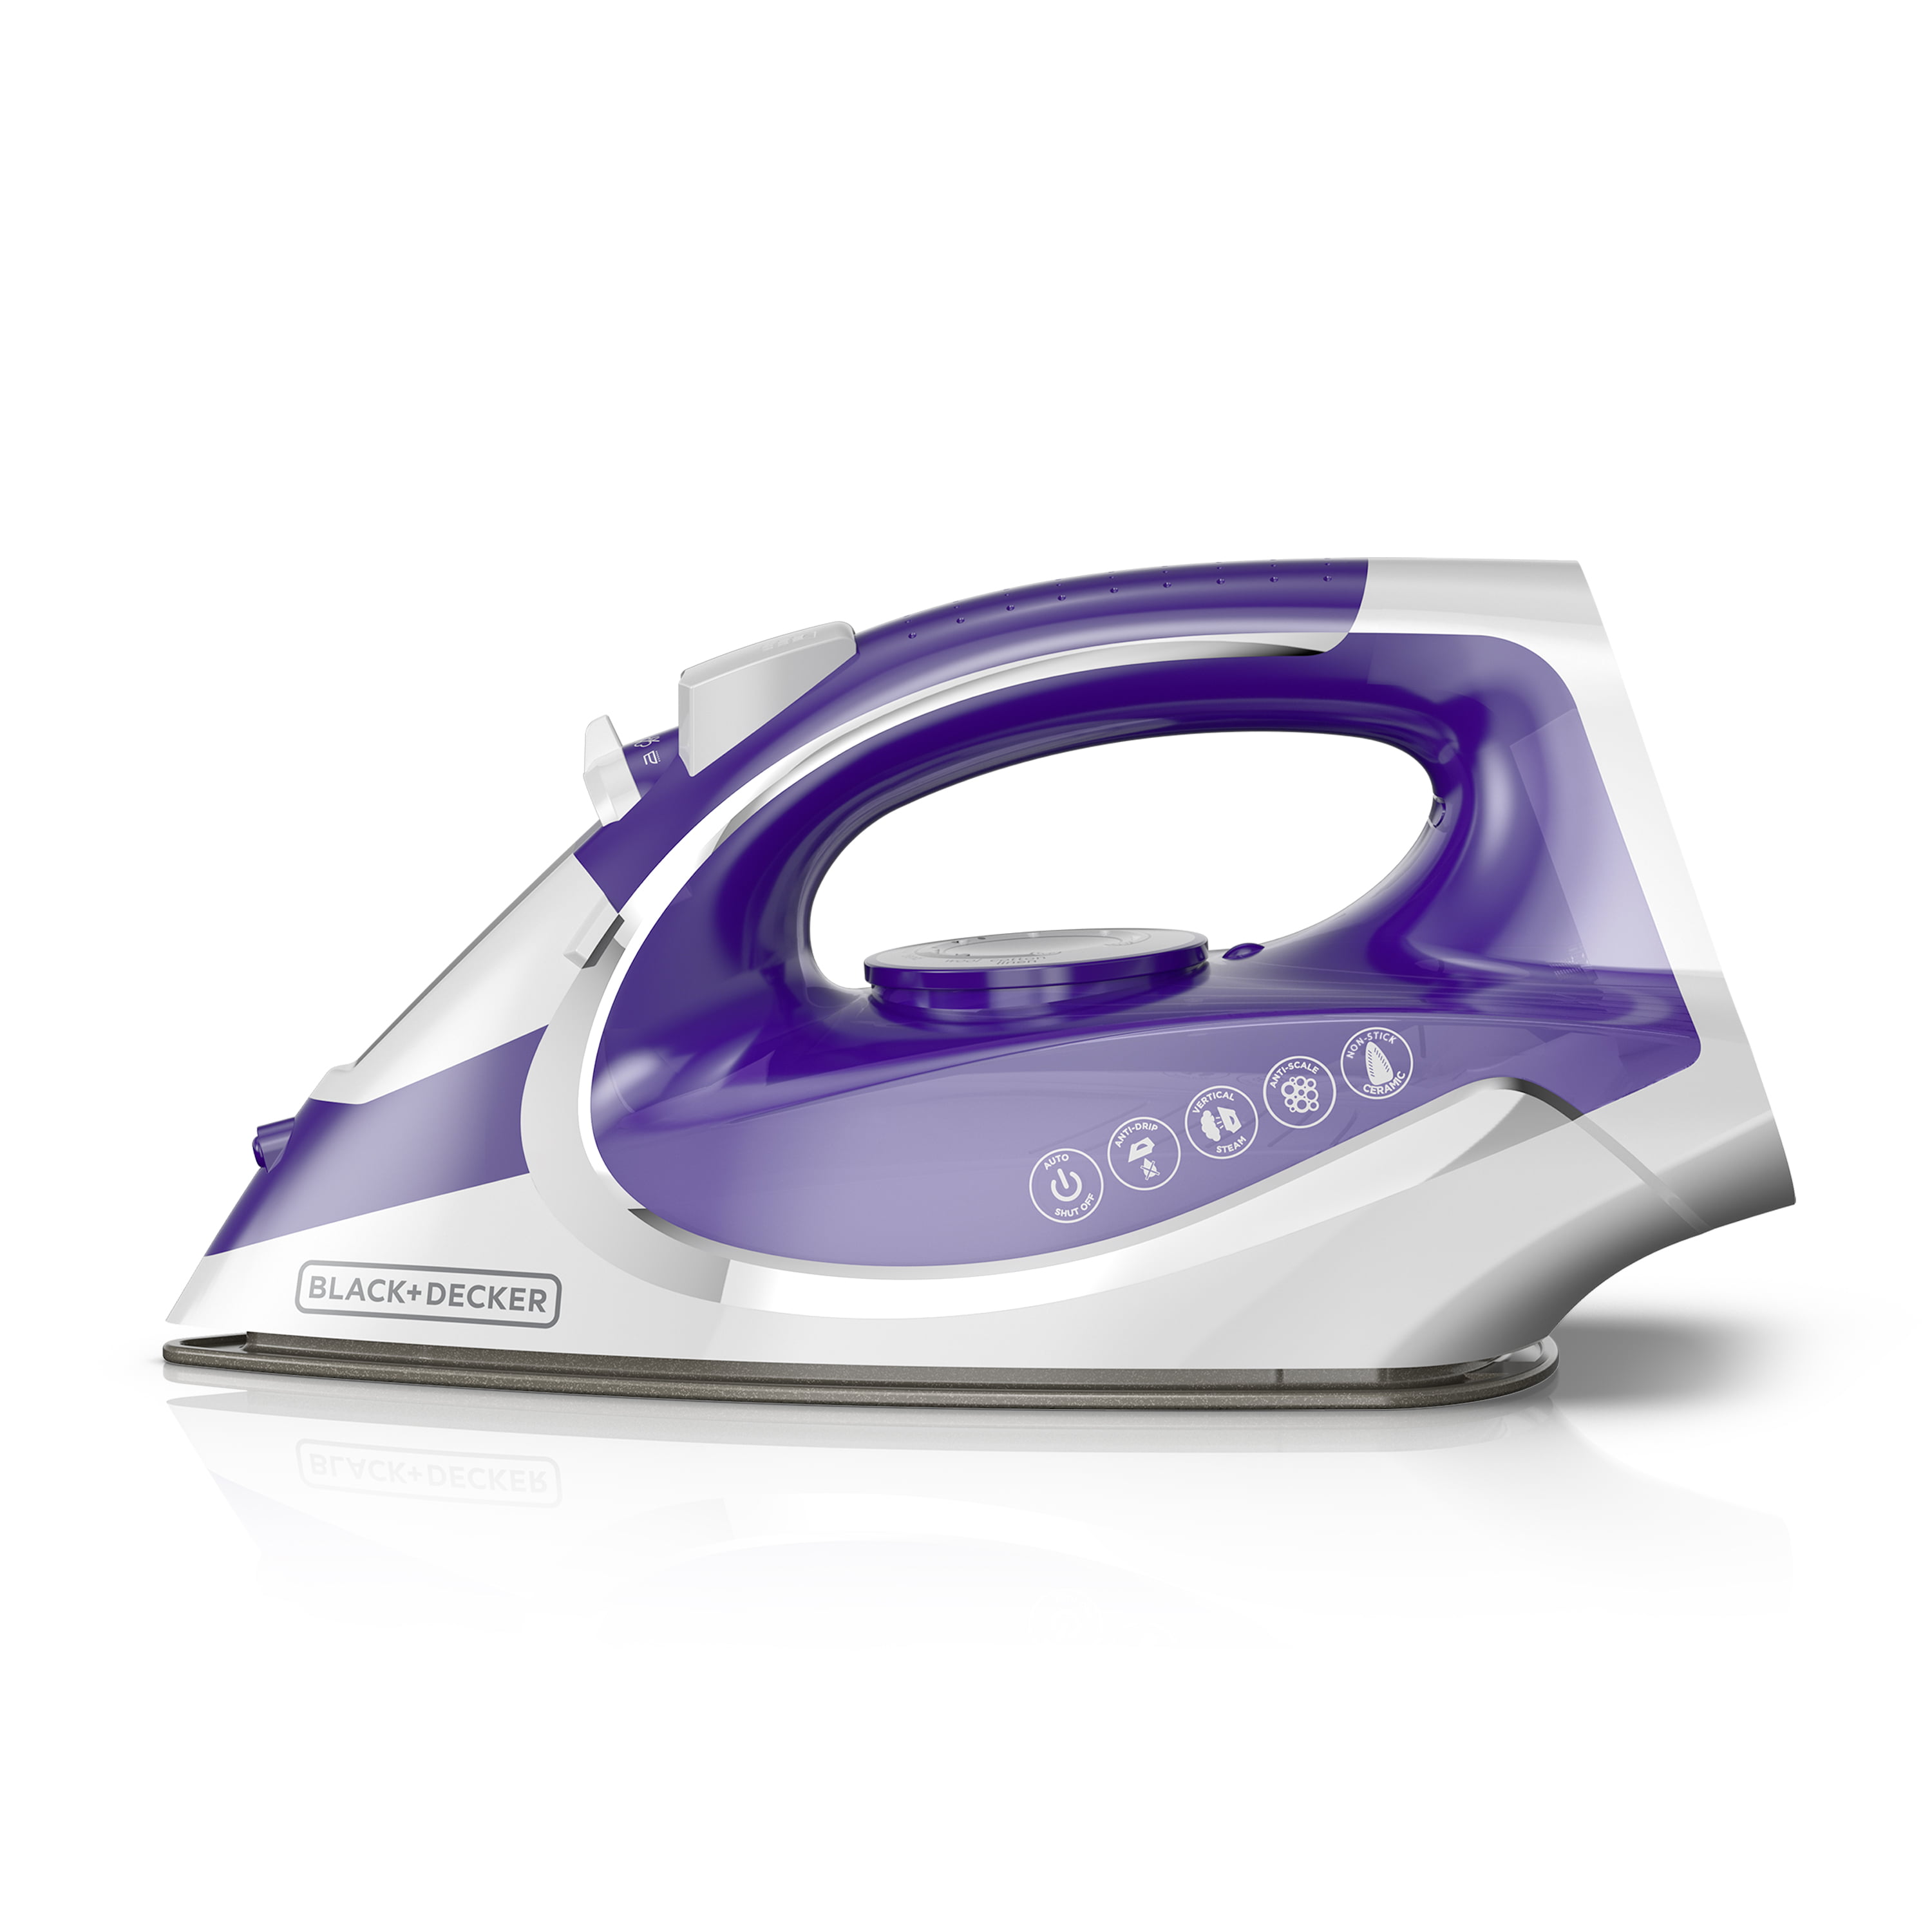 Black and Decker Cordless Iron Review 